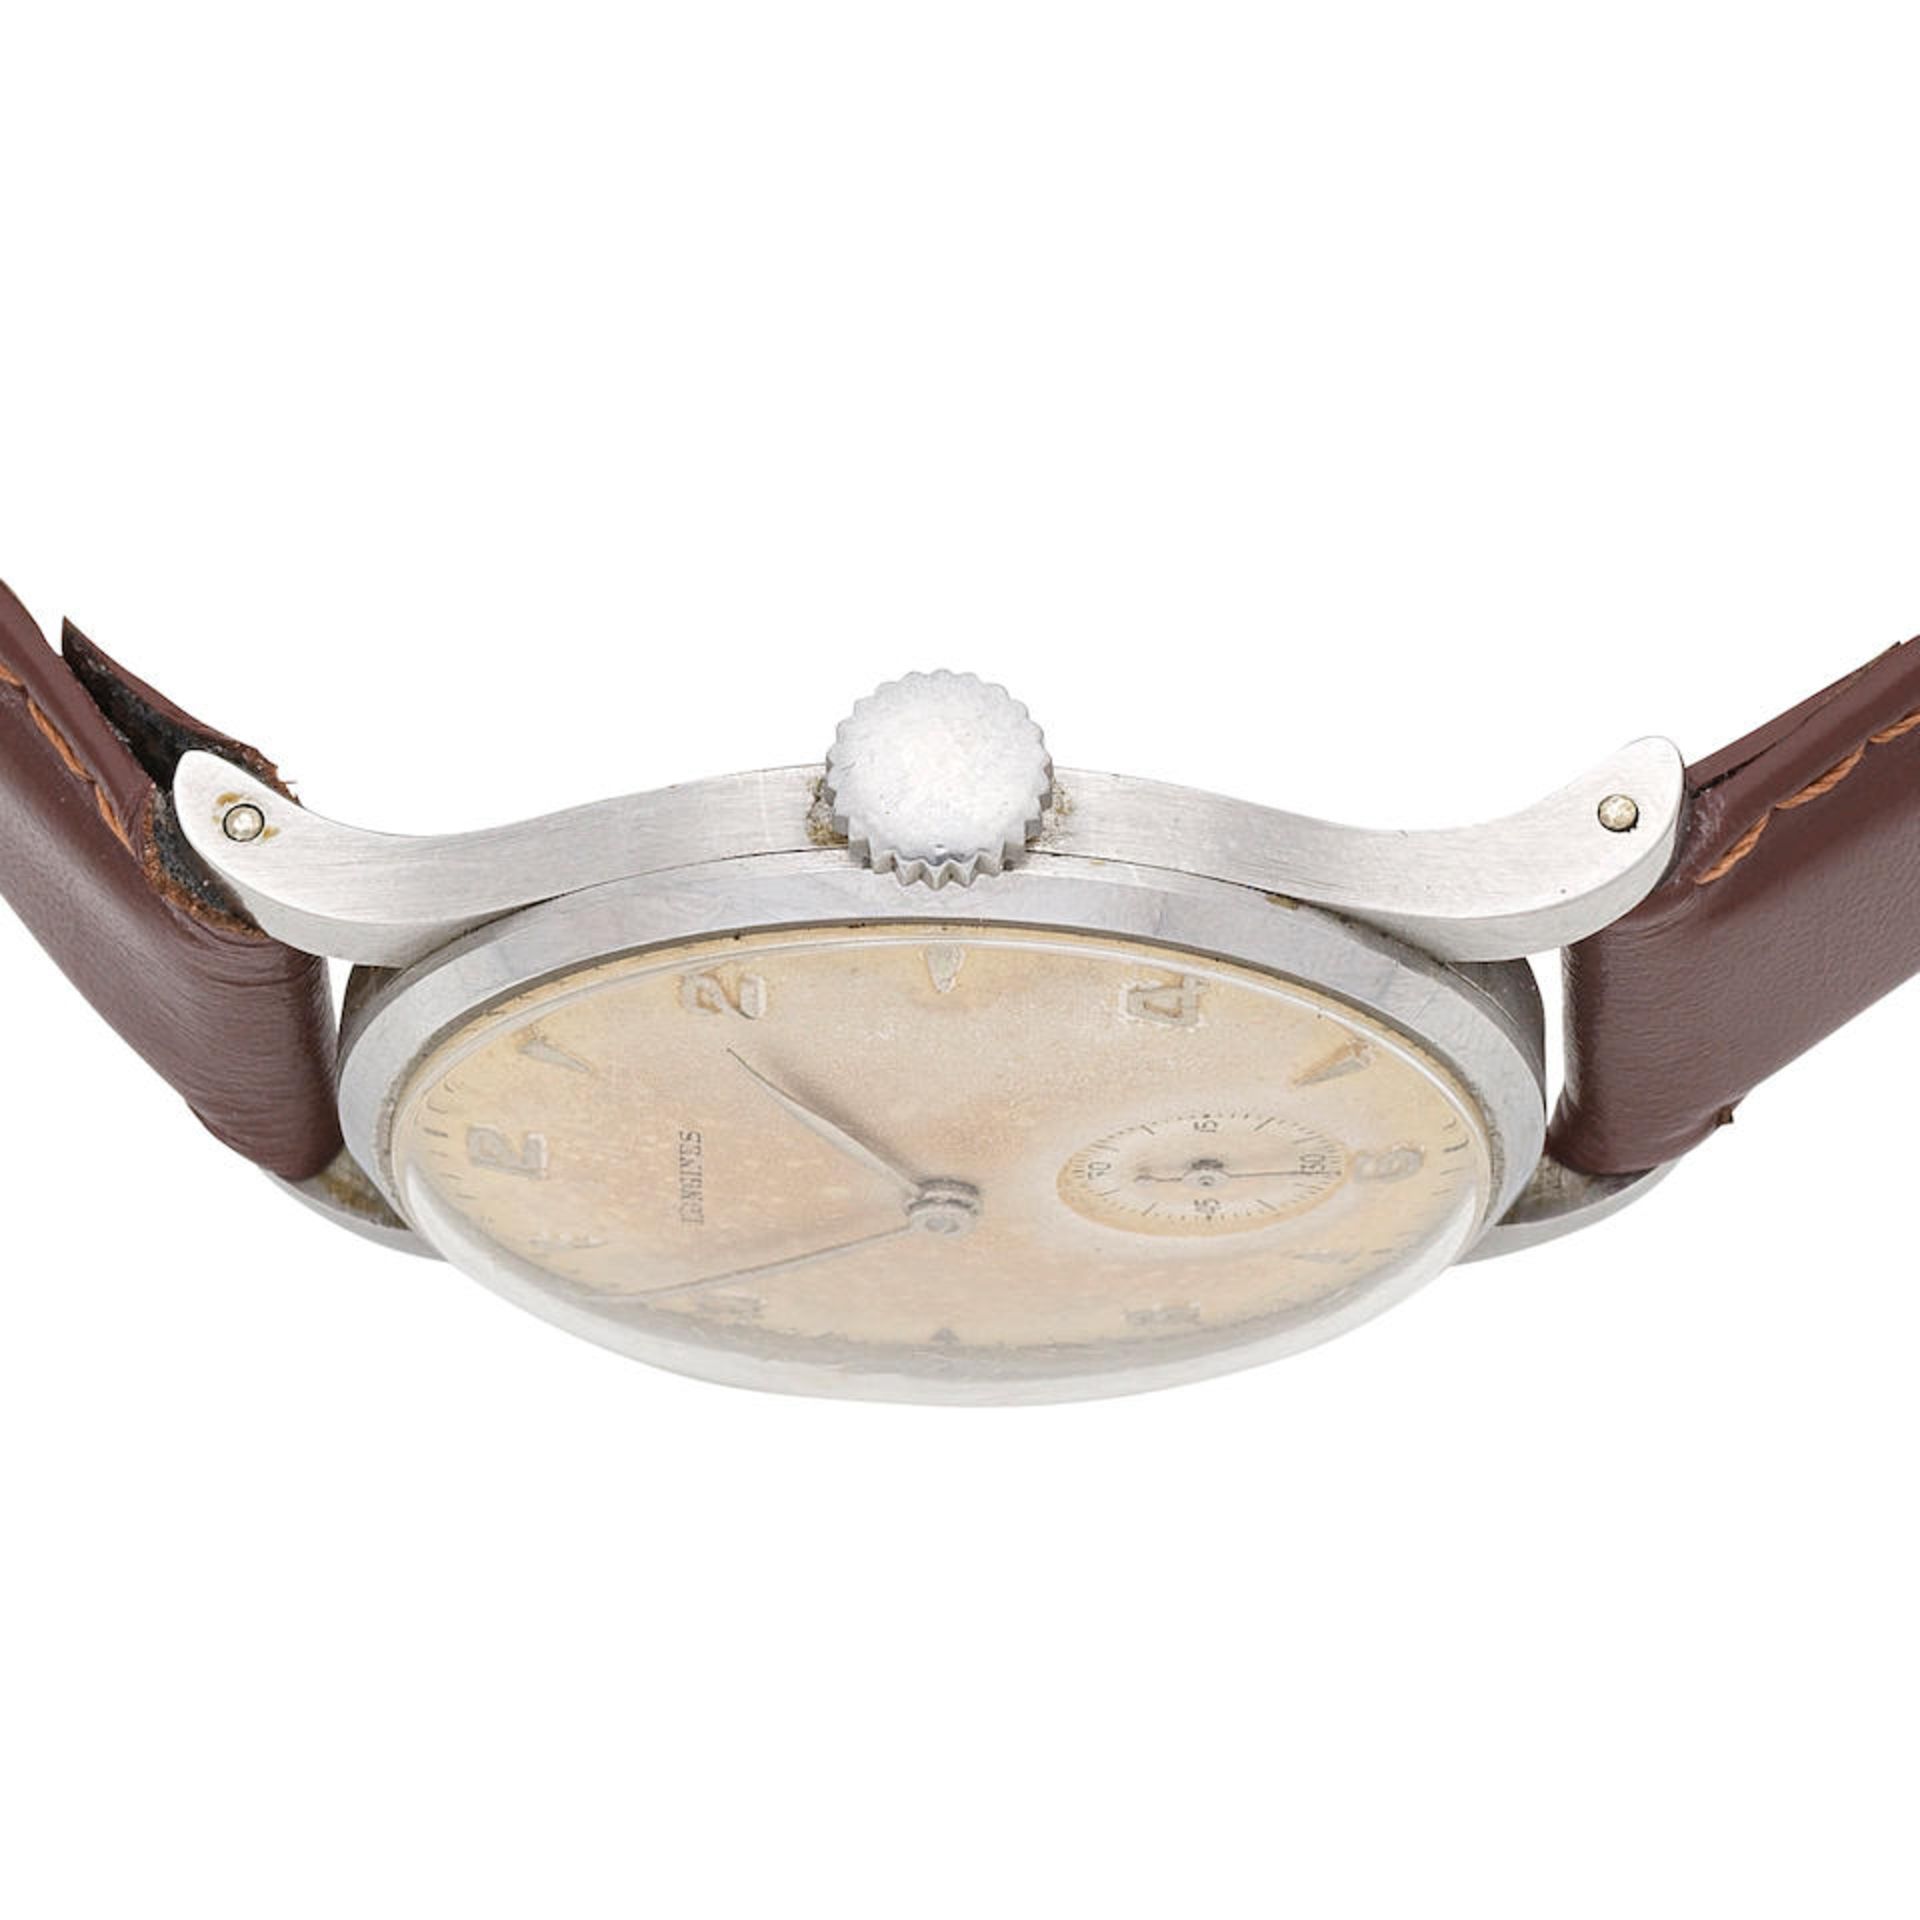 Longines. A stainless steel manual wind wristwatch Circa 1948 - Image 3 of 6